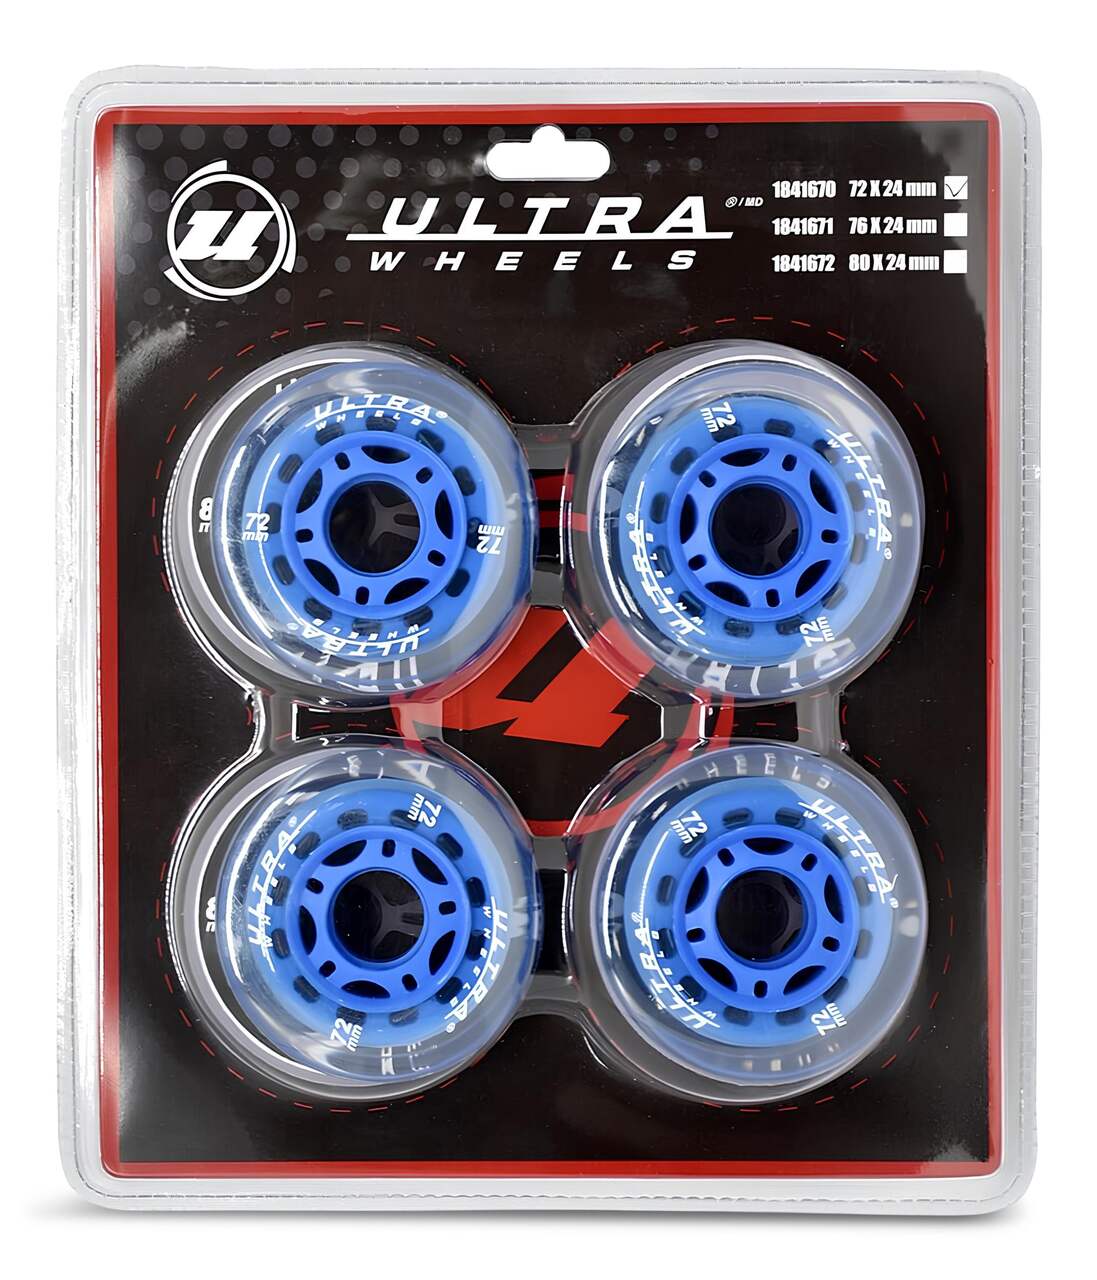 Ultra Wheels Inline Skates Replacement Wheels, Assorted Sizes, Blue, 4-pk